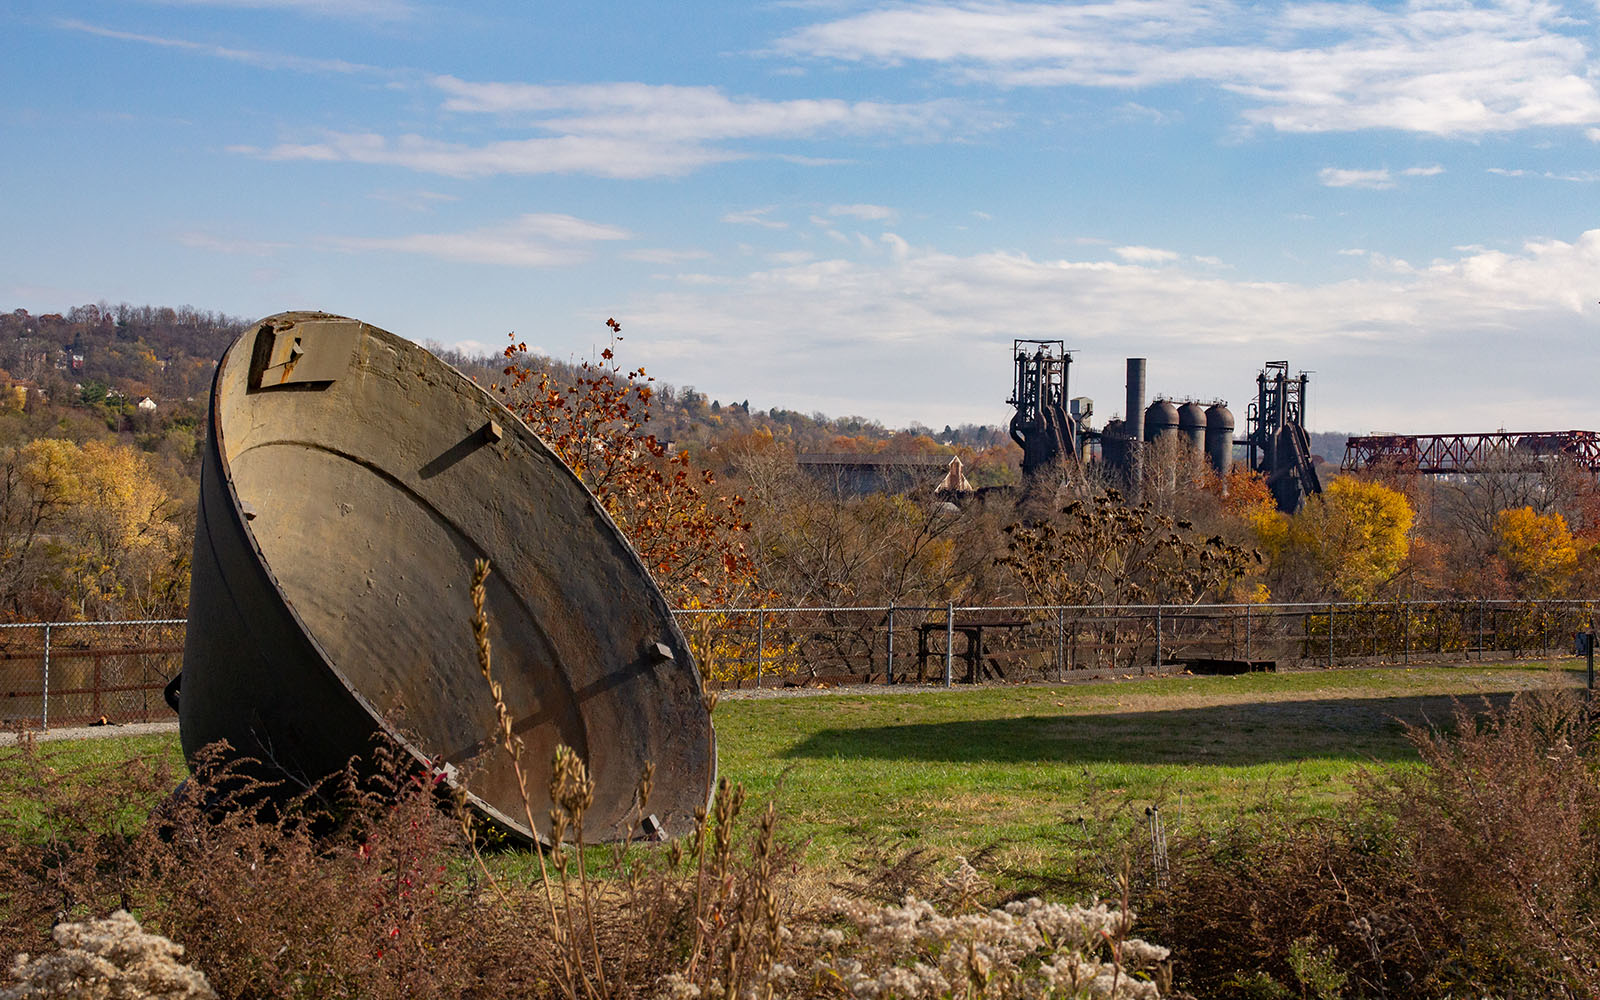 The Carrie Blast Furnaces appear across the river with an industrial furnace cap in the foreground.